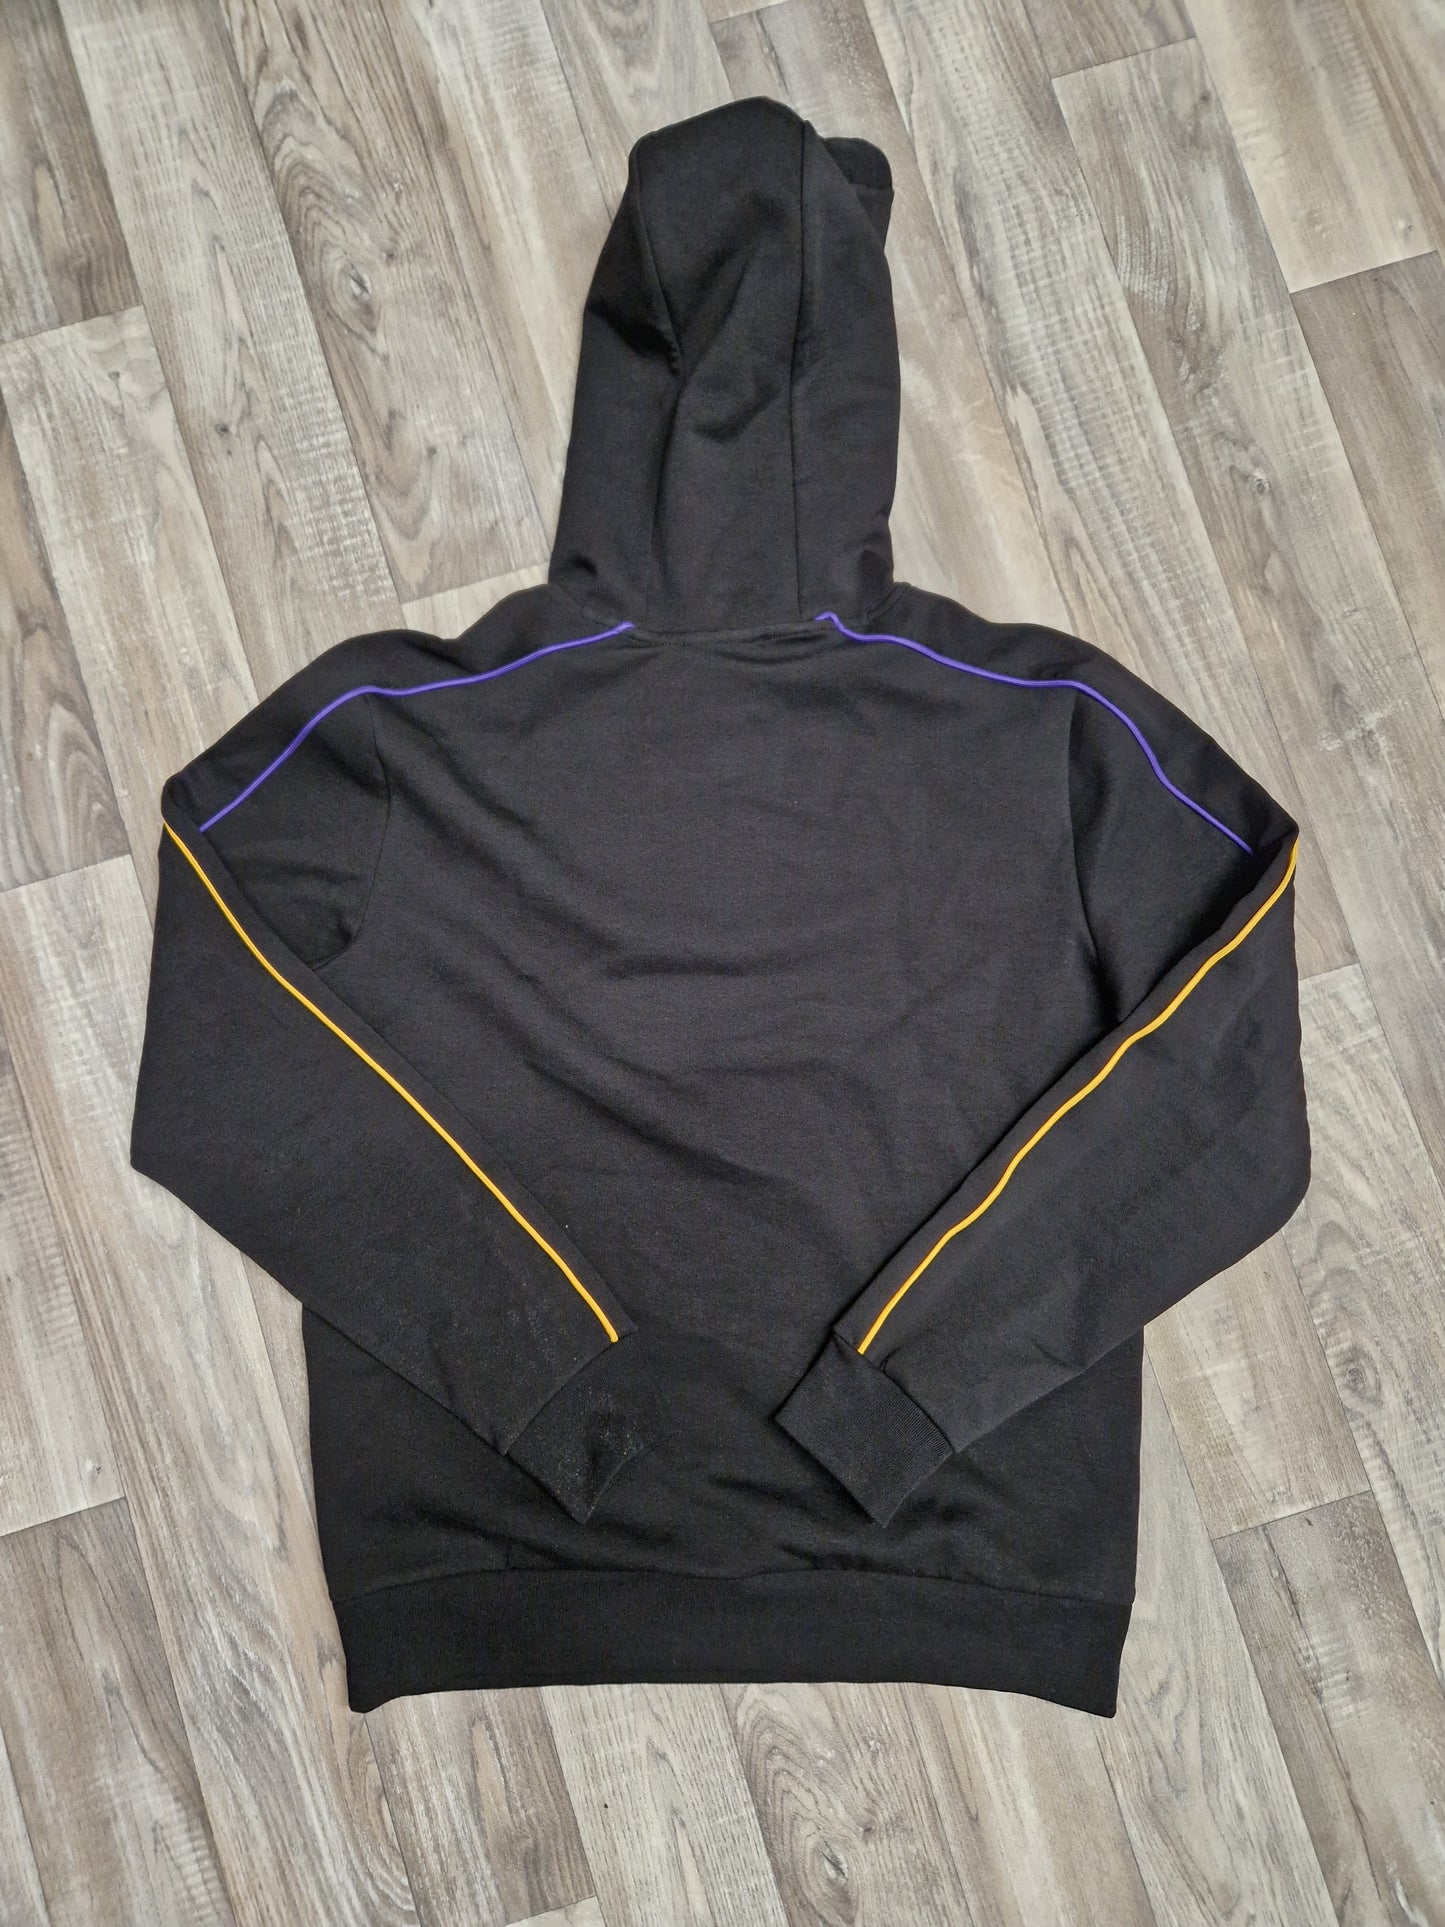 Los Angeles Lakers X Hugo Boss Sweater Hoodie Size Small